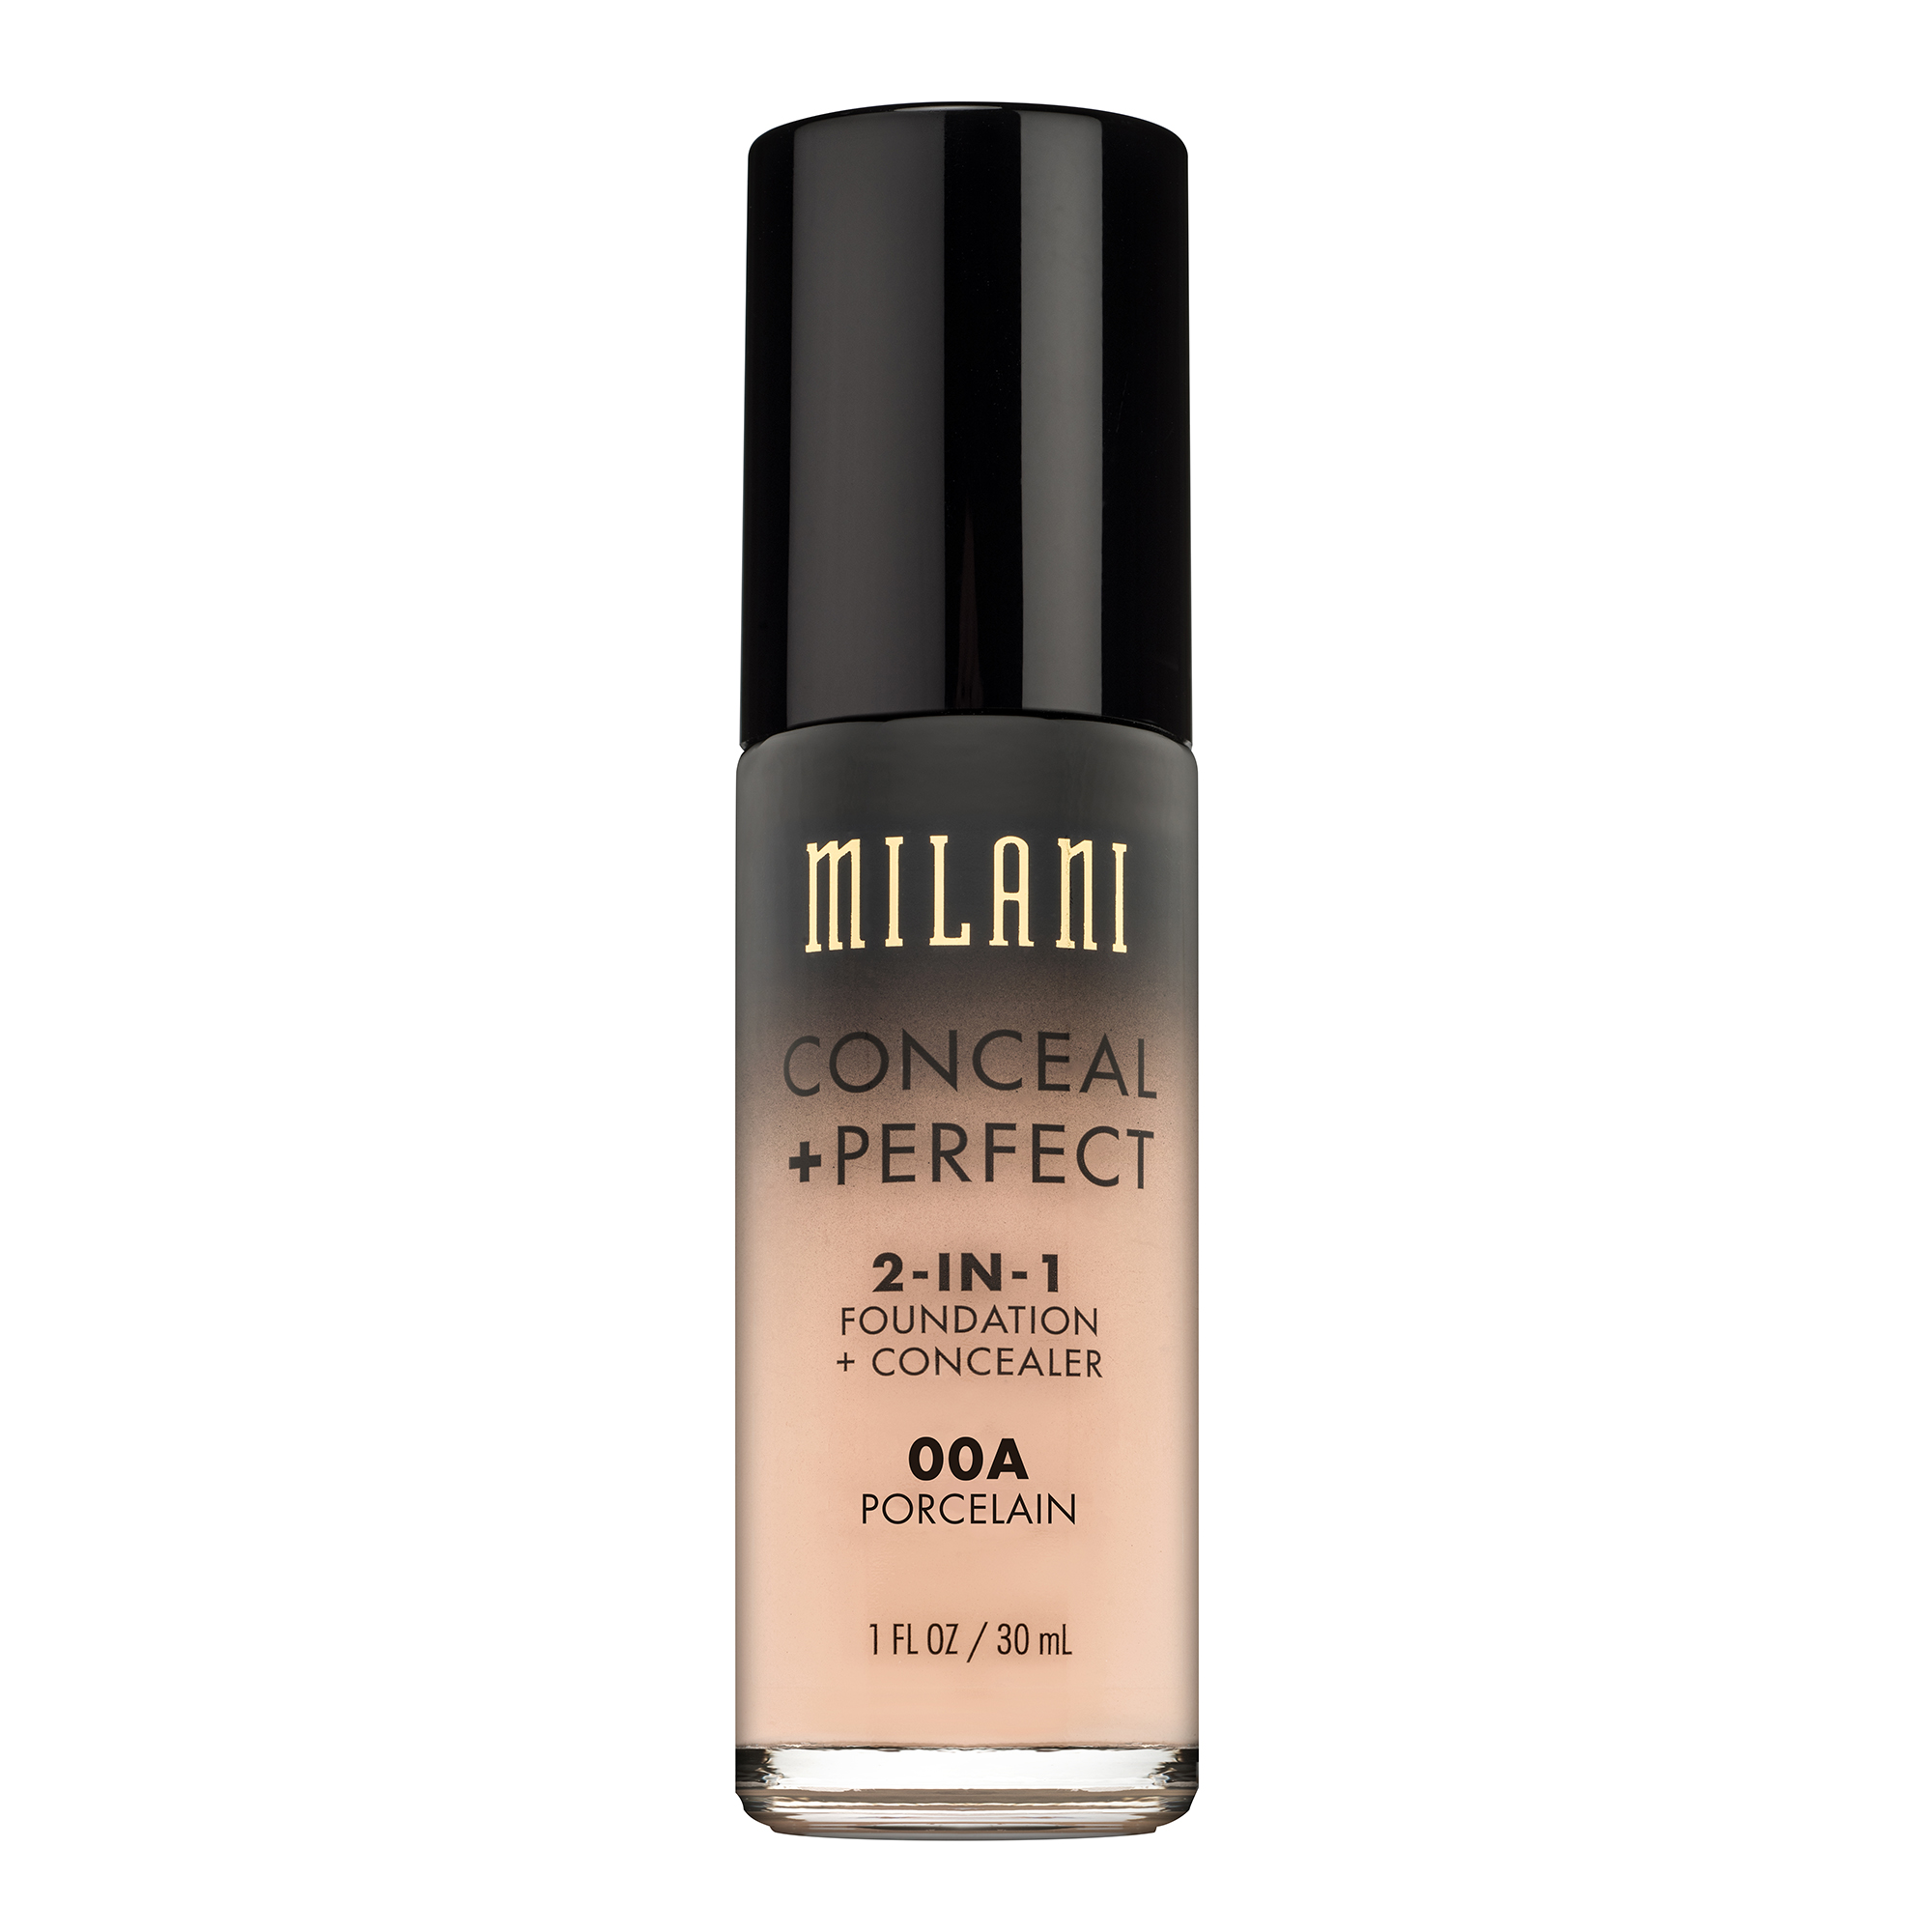 Milani Conceal + Perfect 2-in-1 Foundation + Concealer, Porcelain - image 1 of 7